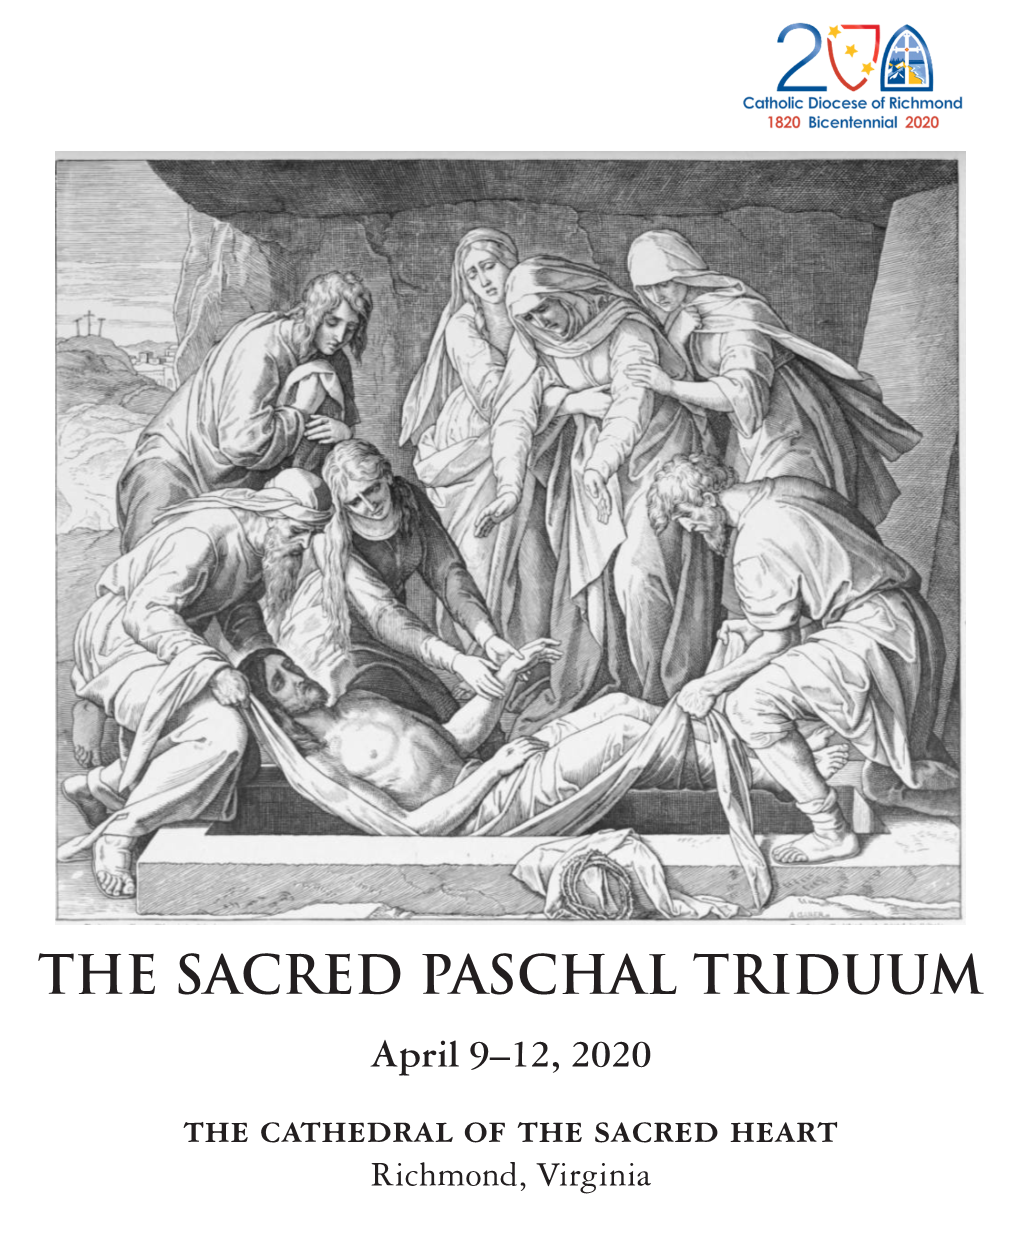 THE SACRED PASCHAL TRIDUUM April 9–12, 2020 the Cathedral of the Sacred Heart Richmond, Virginia 1 the SACRED PASCHAL TRIDUUM